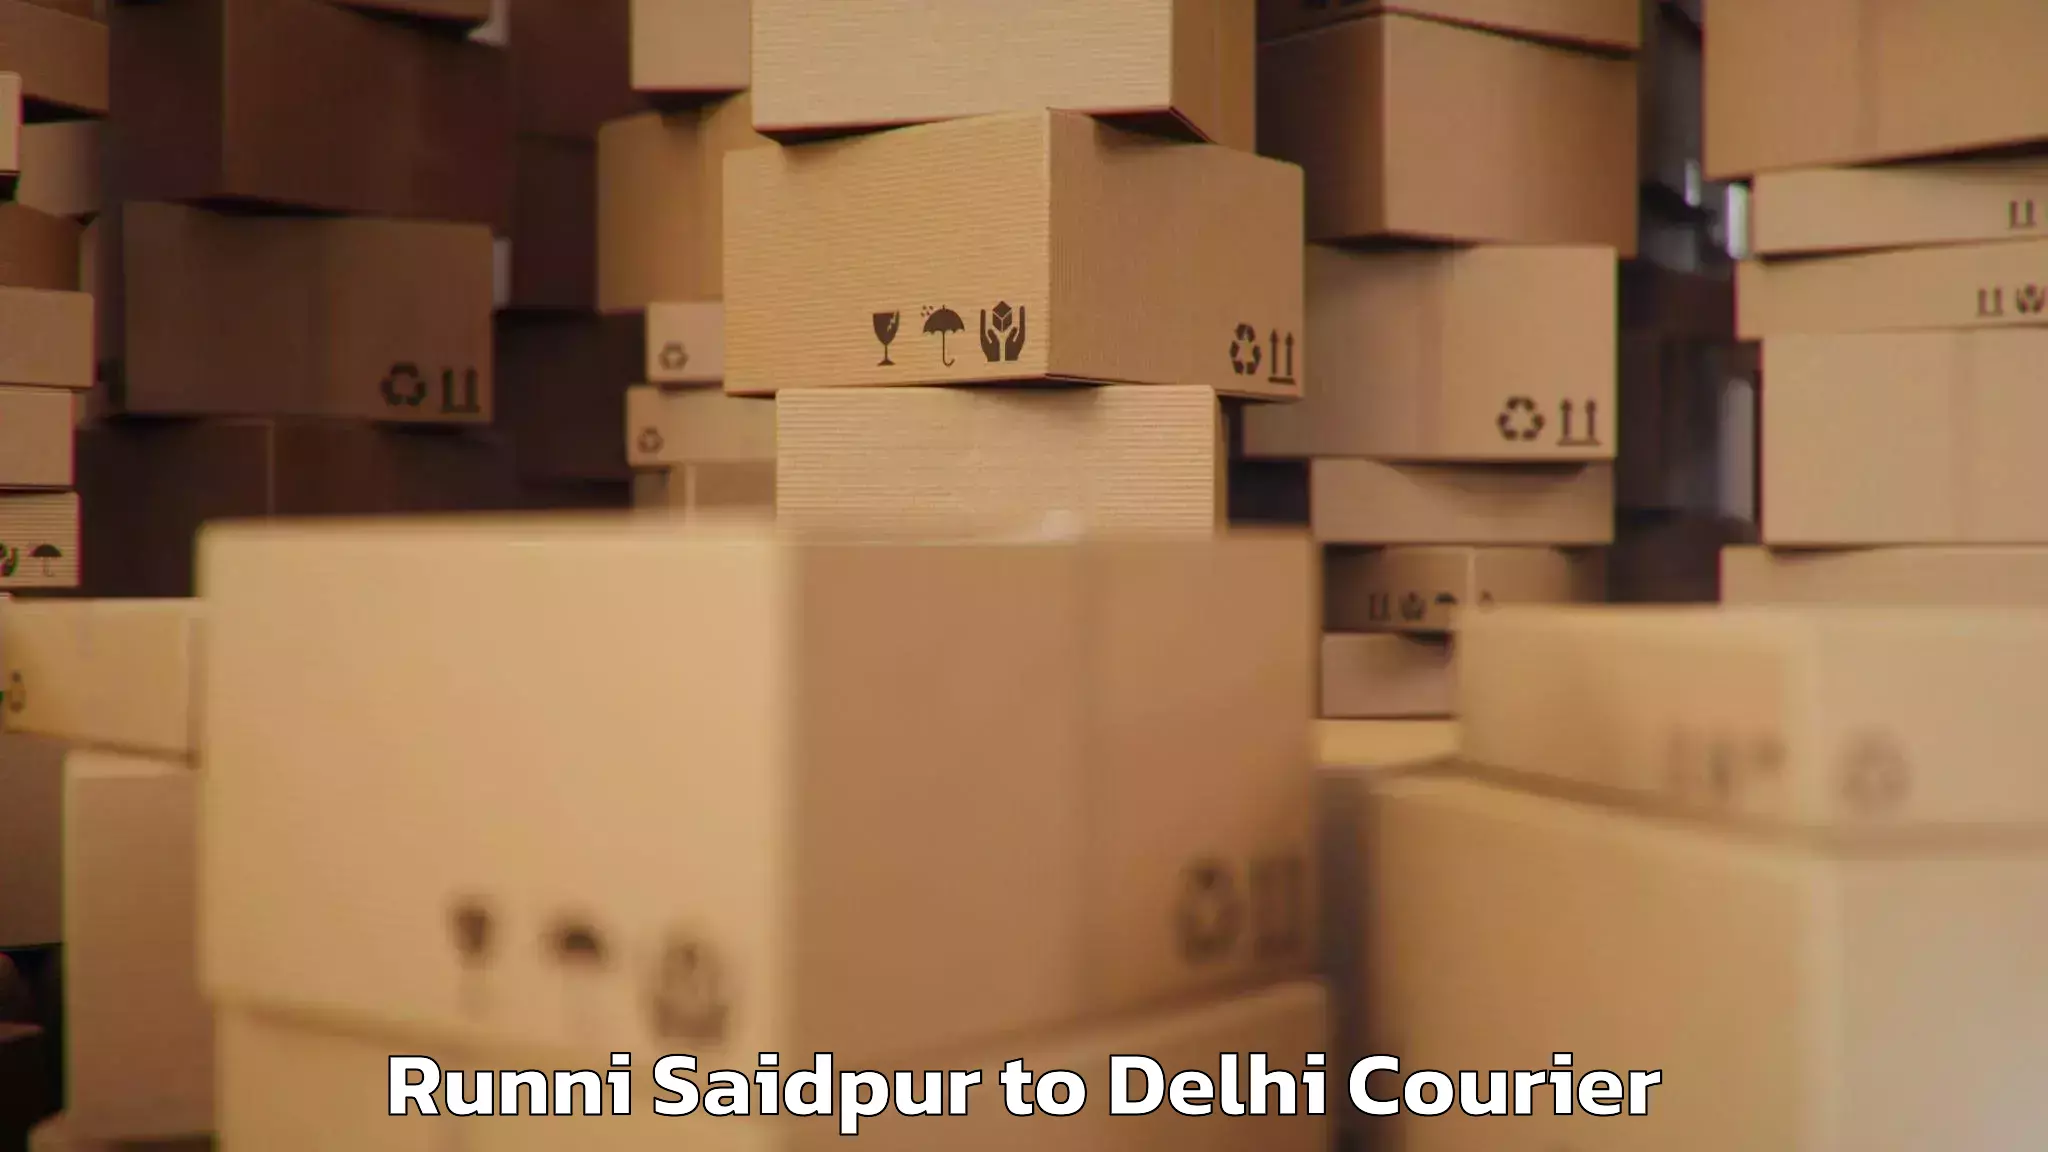 Personal effects shipping Runni Saidpur to Lodhi Road